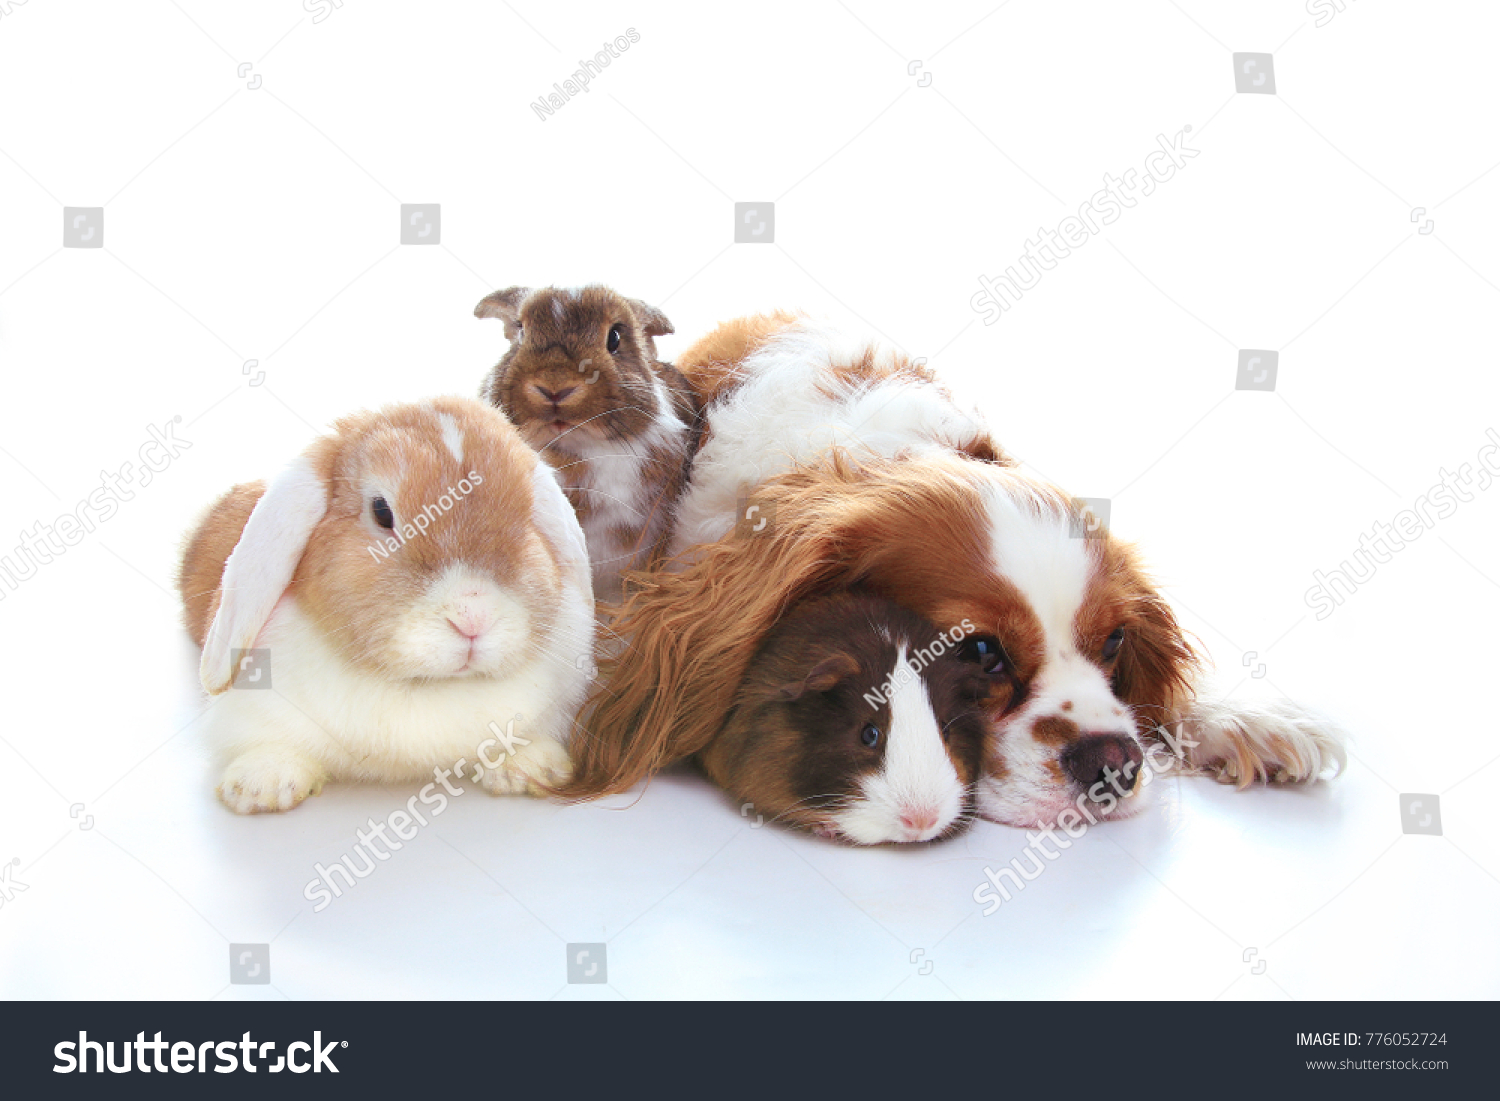 Animal friends. True pet friends. Dog rabbit bunny lop animals together on isolated white studio background. Pets love each other. #776052724